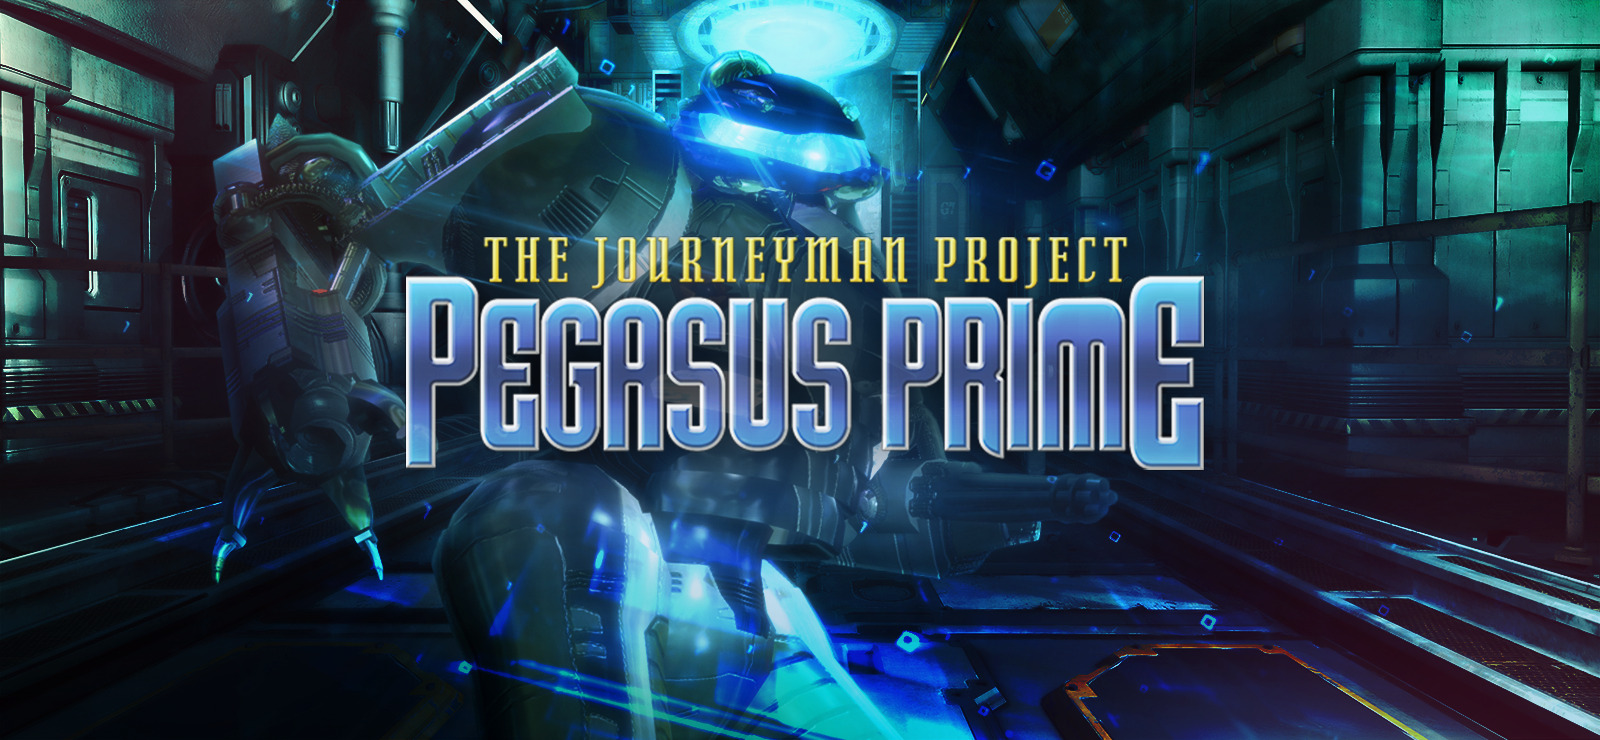 cool retro video games - The Journeyman Project Pegasus Prime video game